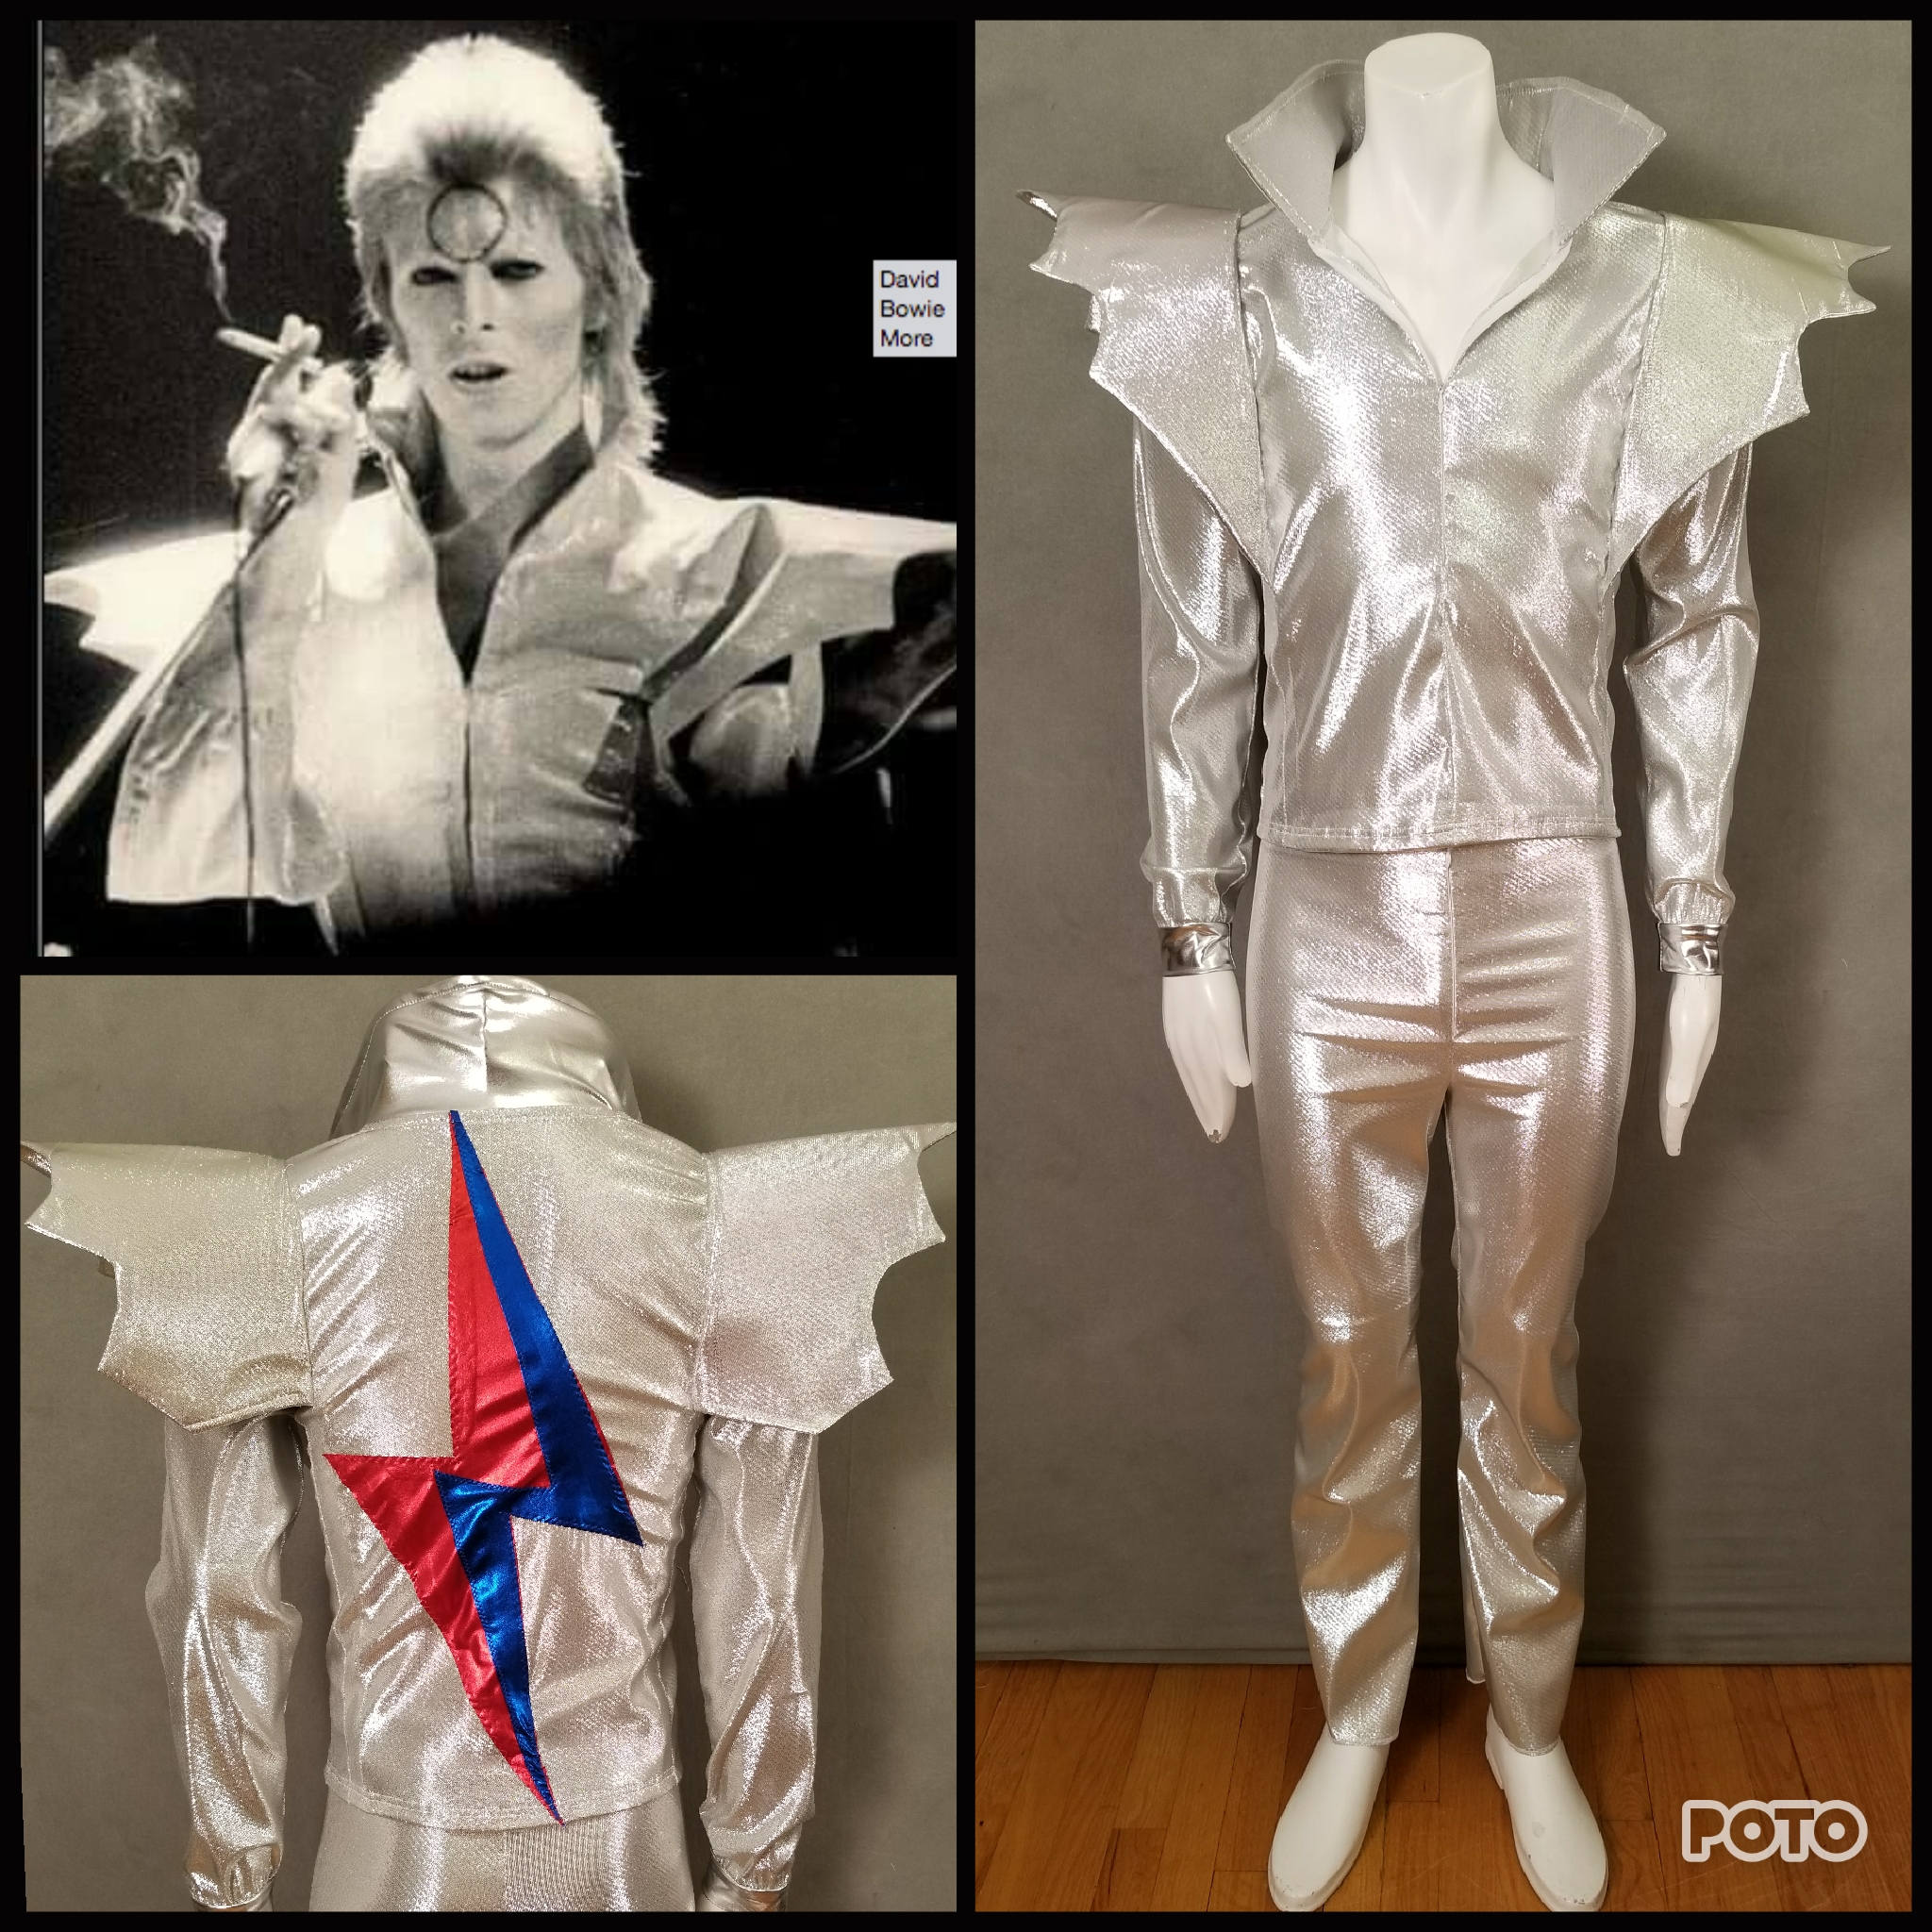 Made to Order David Bowie / Ziggy Stardust Inspired Silver 2 Piece Suit with 'Bat Wings' and Lightning Bolt on The Back of Jacket for Men